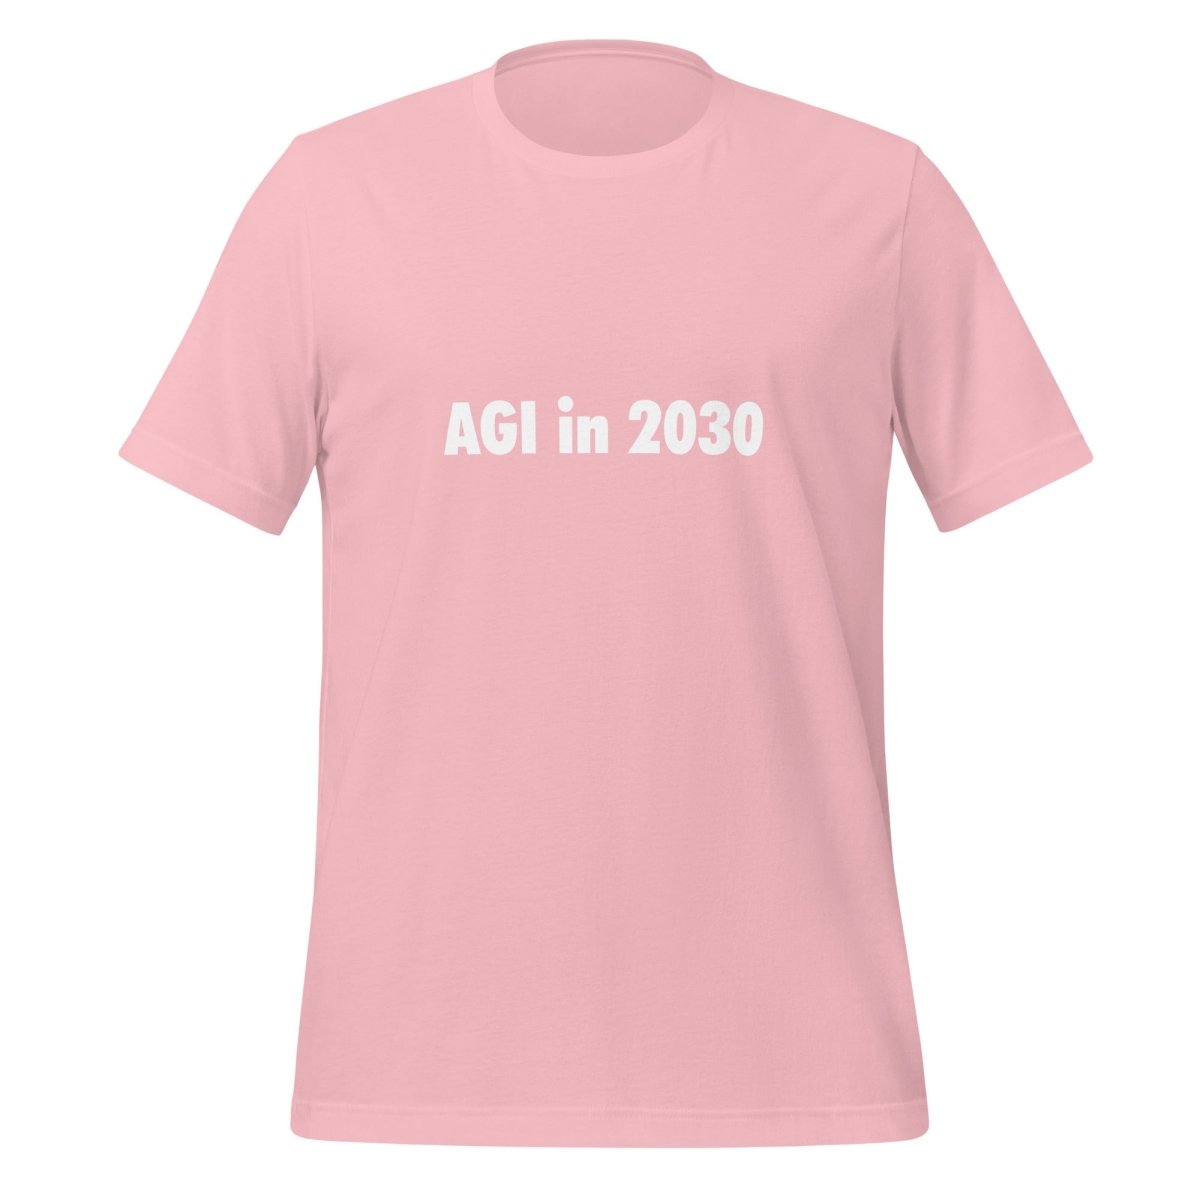 AGI in 2030 T - Shirt (unisex) - Pink - AI Store